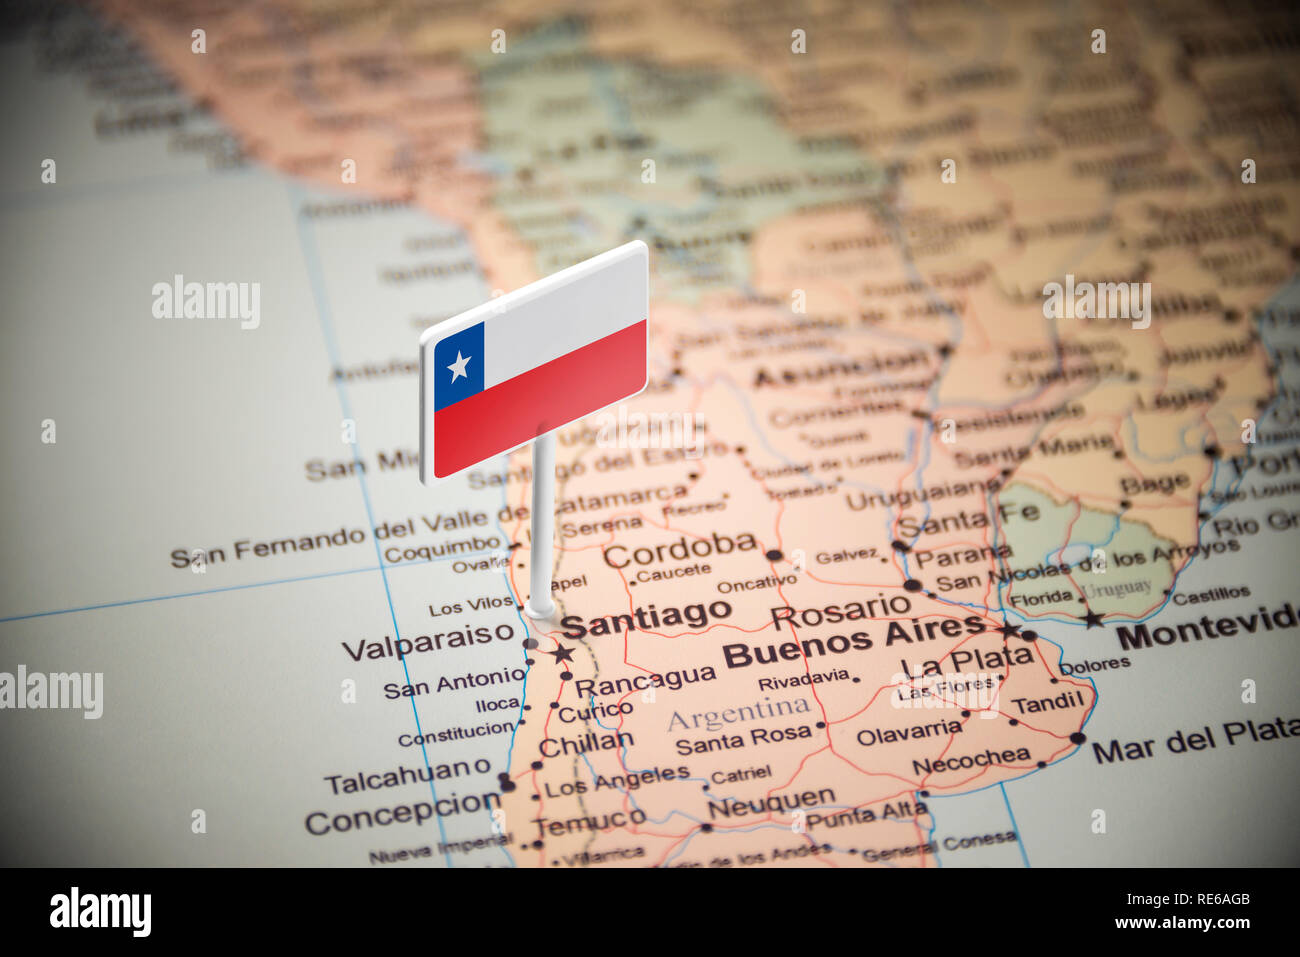 Chile marked with a flag on the map Stock Photo